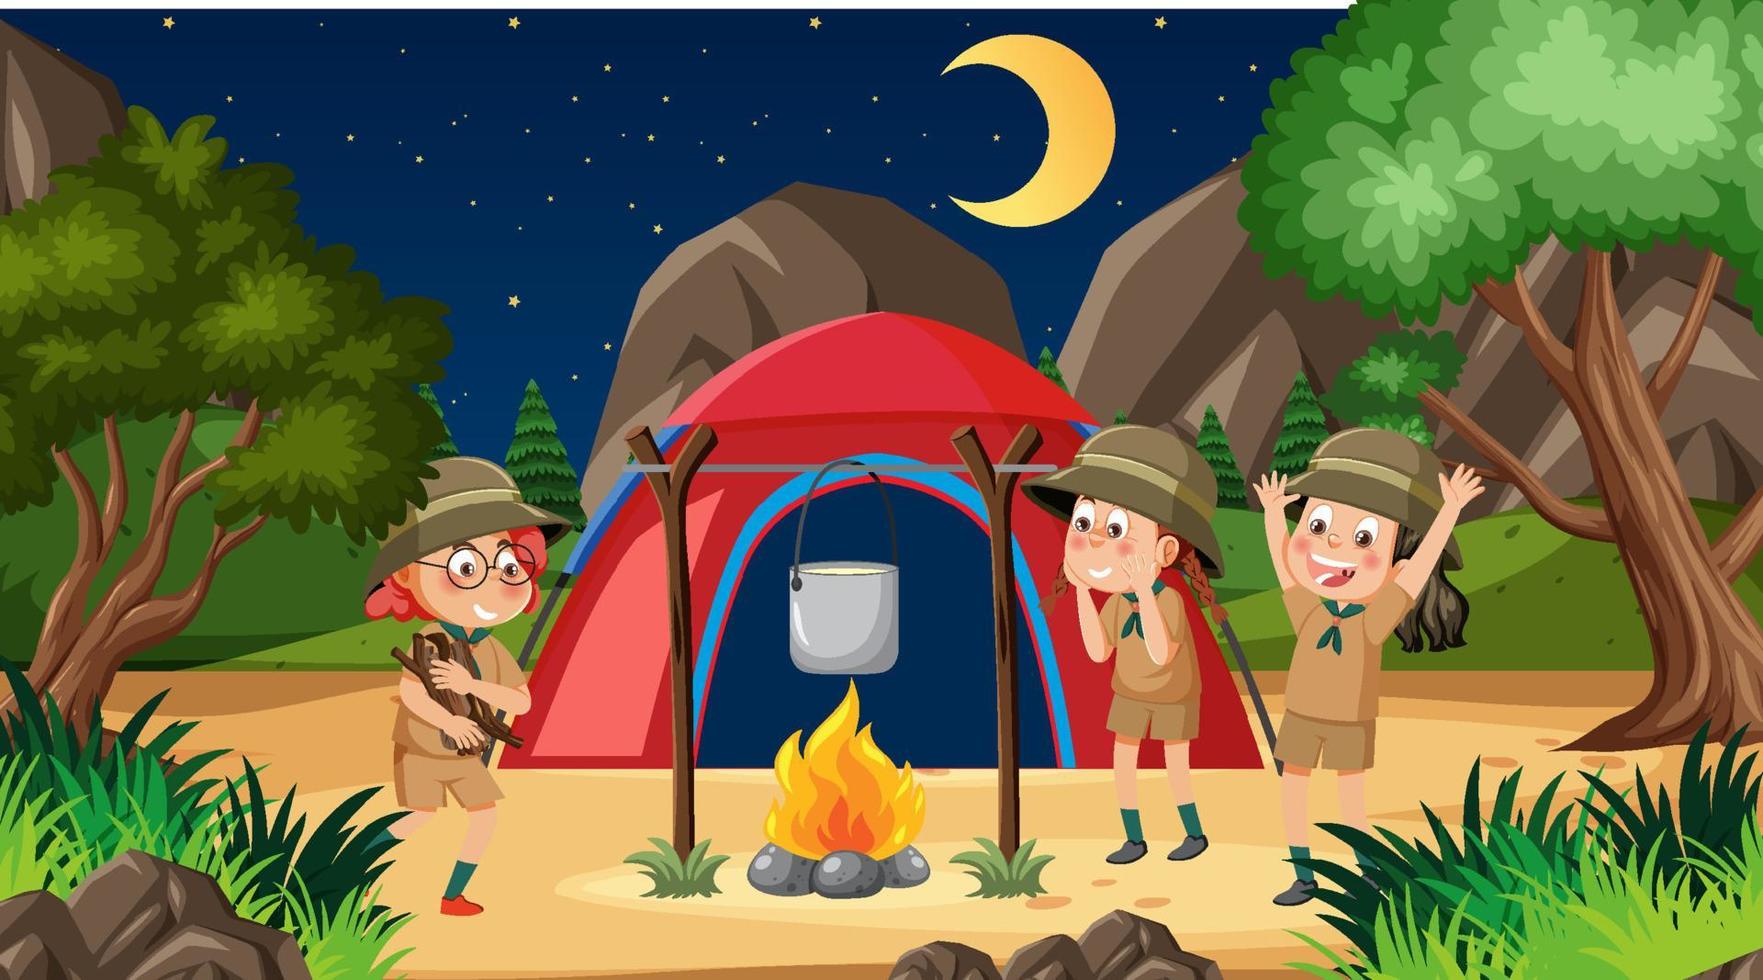 Children camping in the forest vector